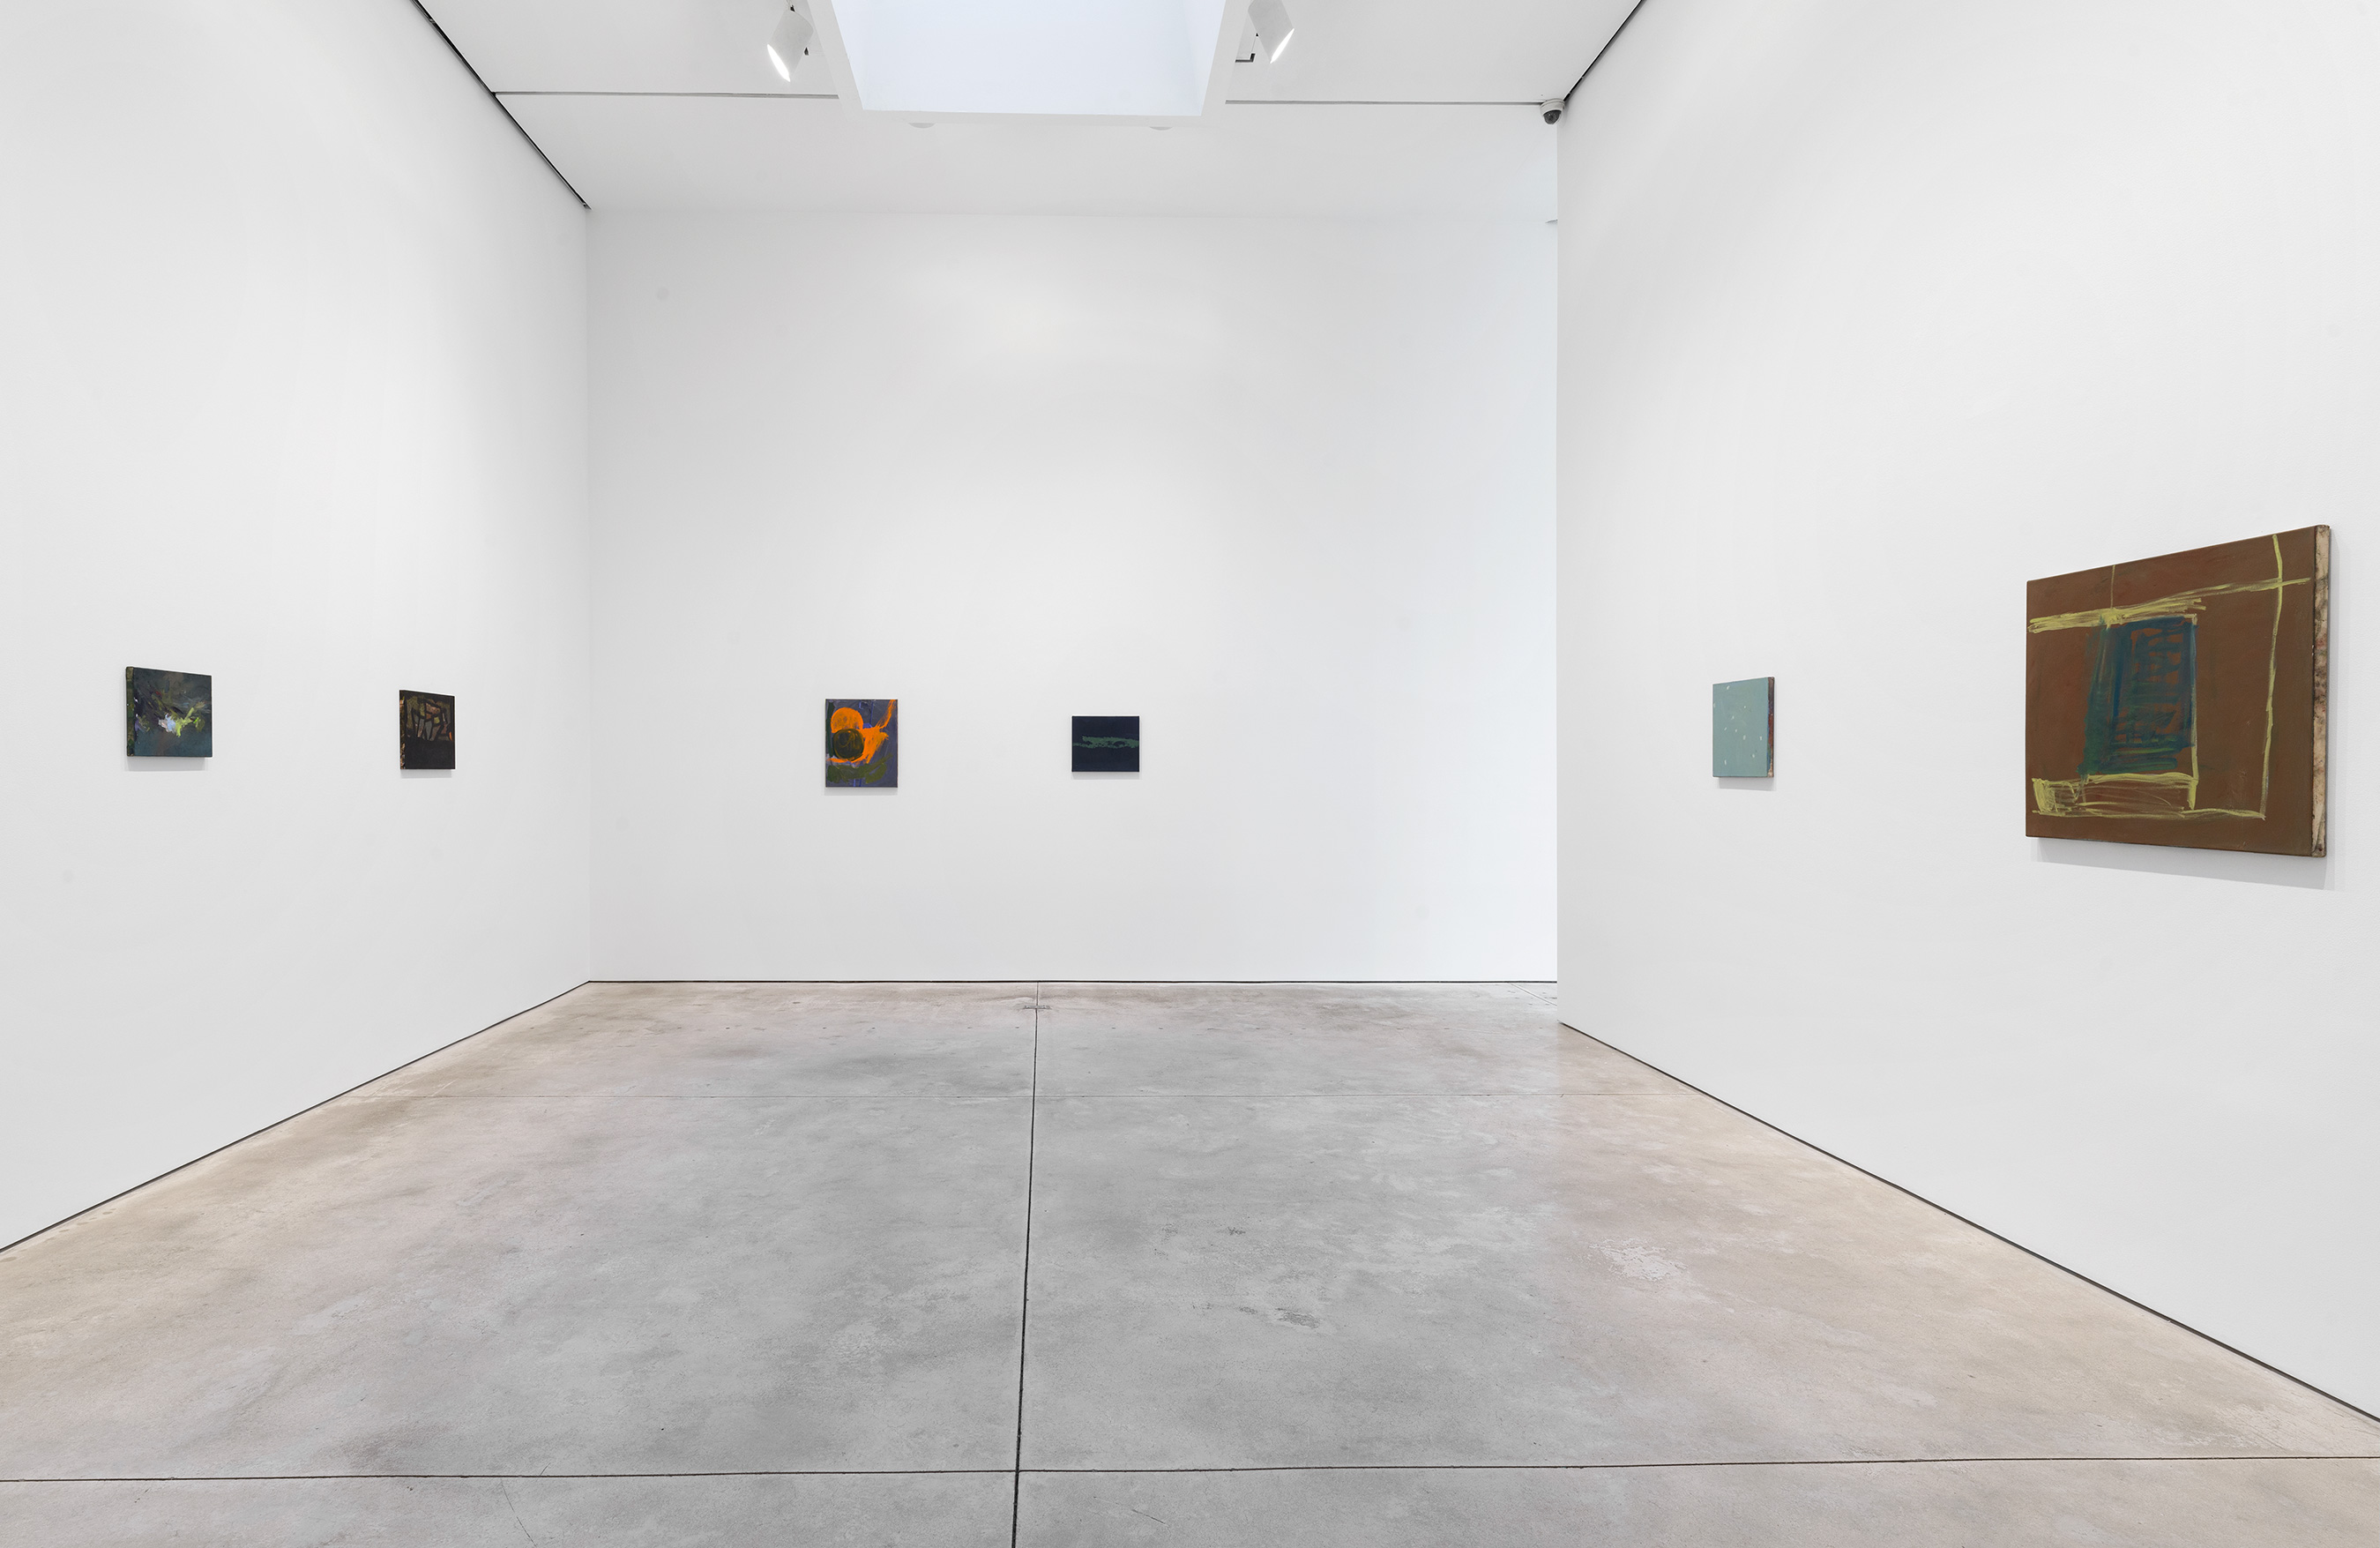 Installation image for Peter Shear: Following Sea, at Cheim & Read